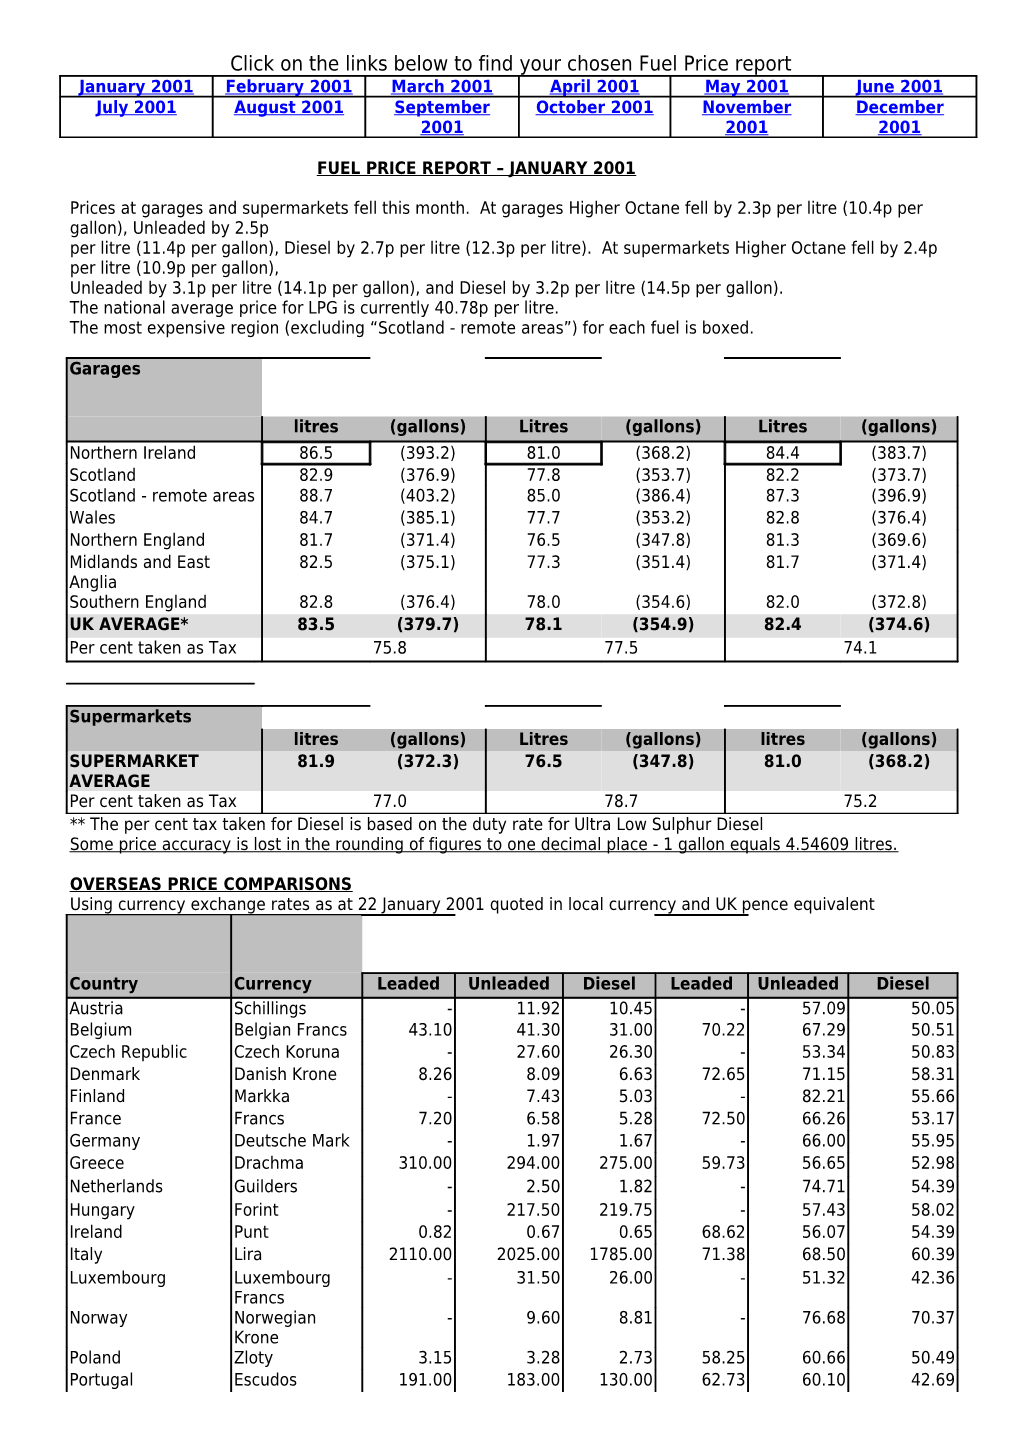 Fuel Price Report - May 1999